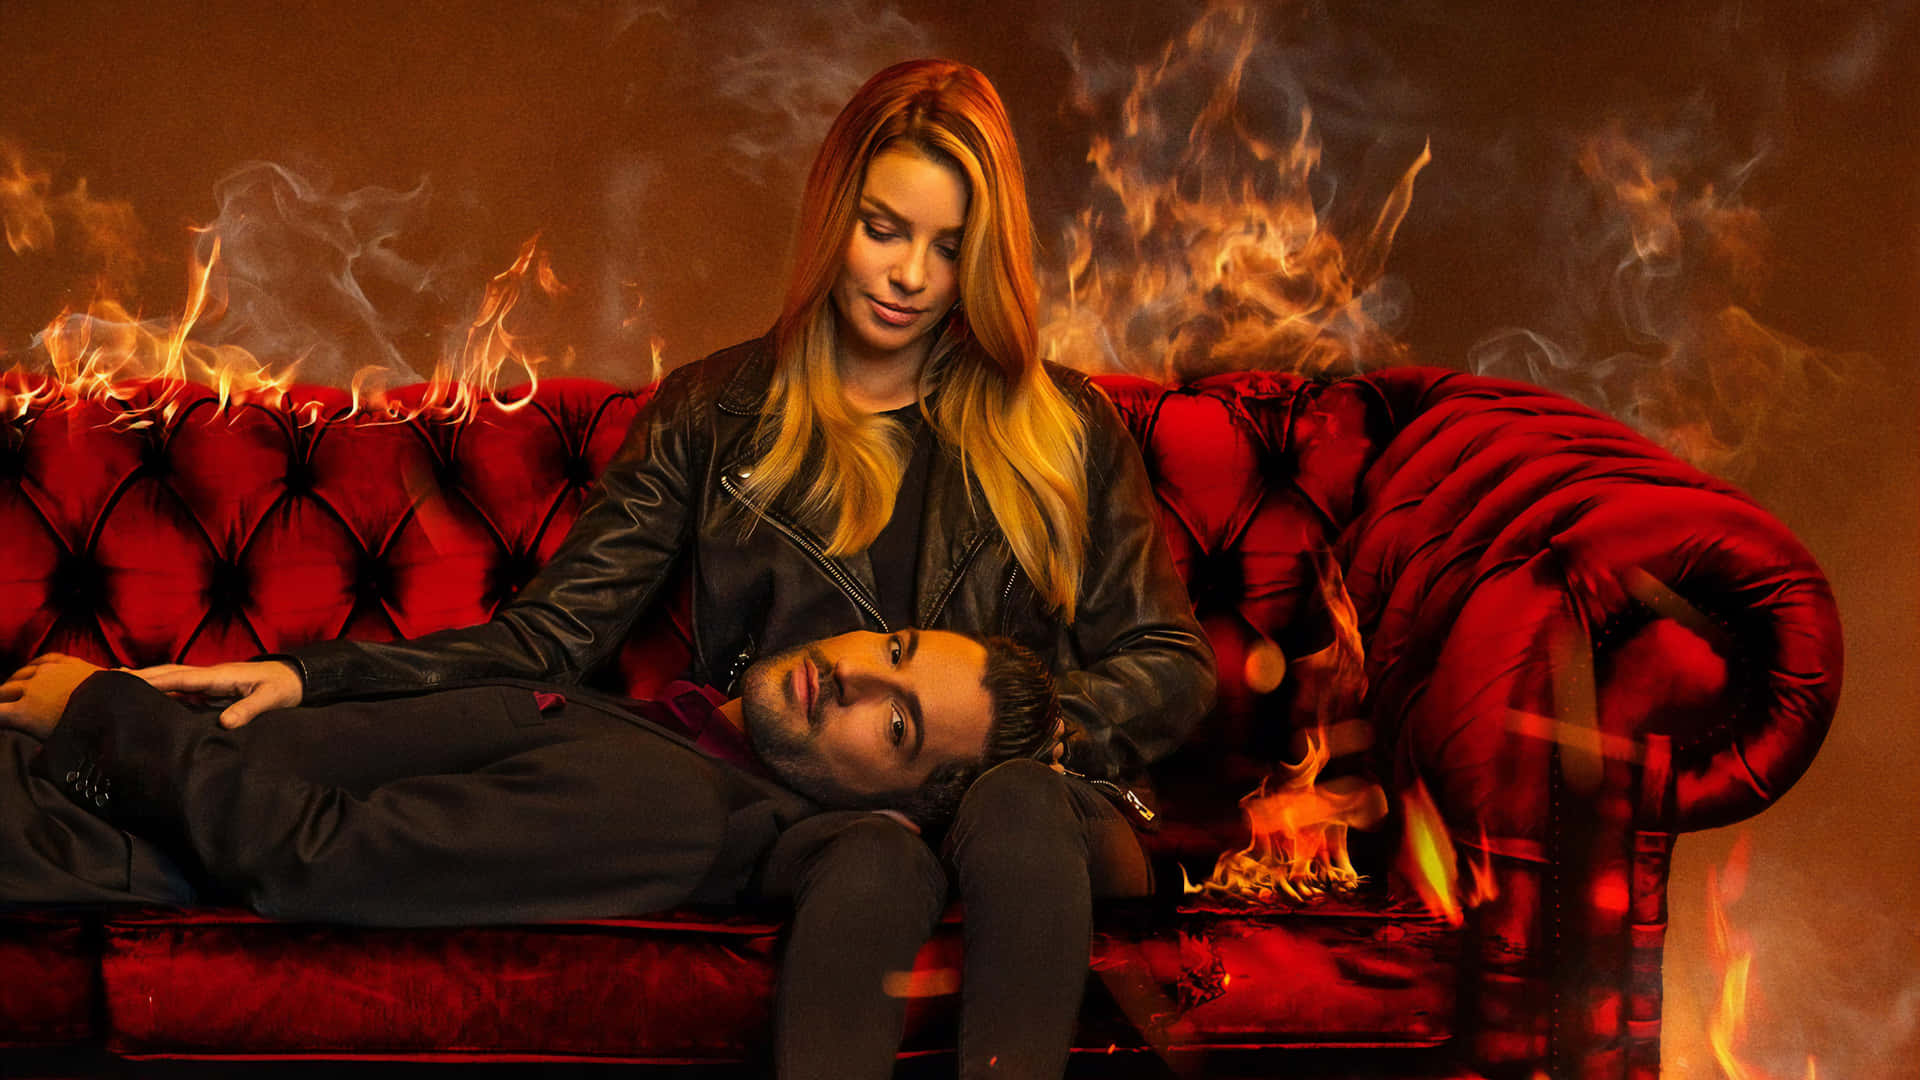 A Man And Woman Laying On A Red Couch With Fire Wallpaper